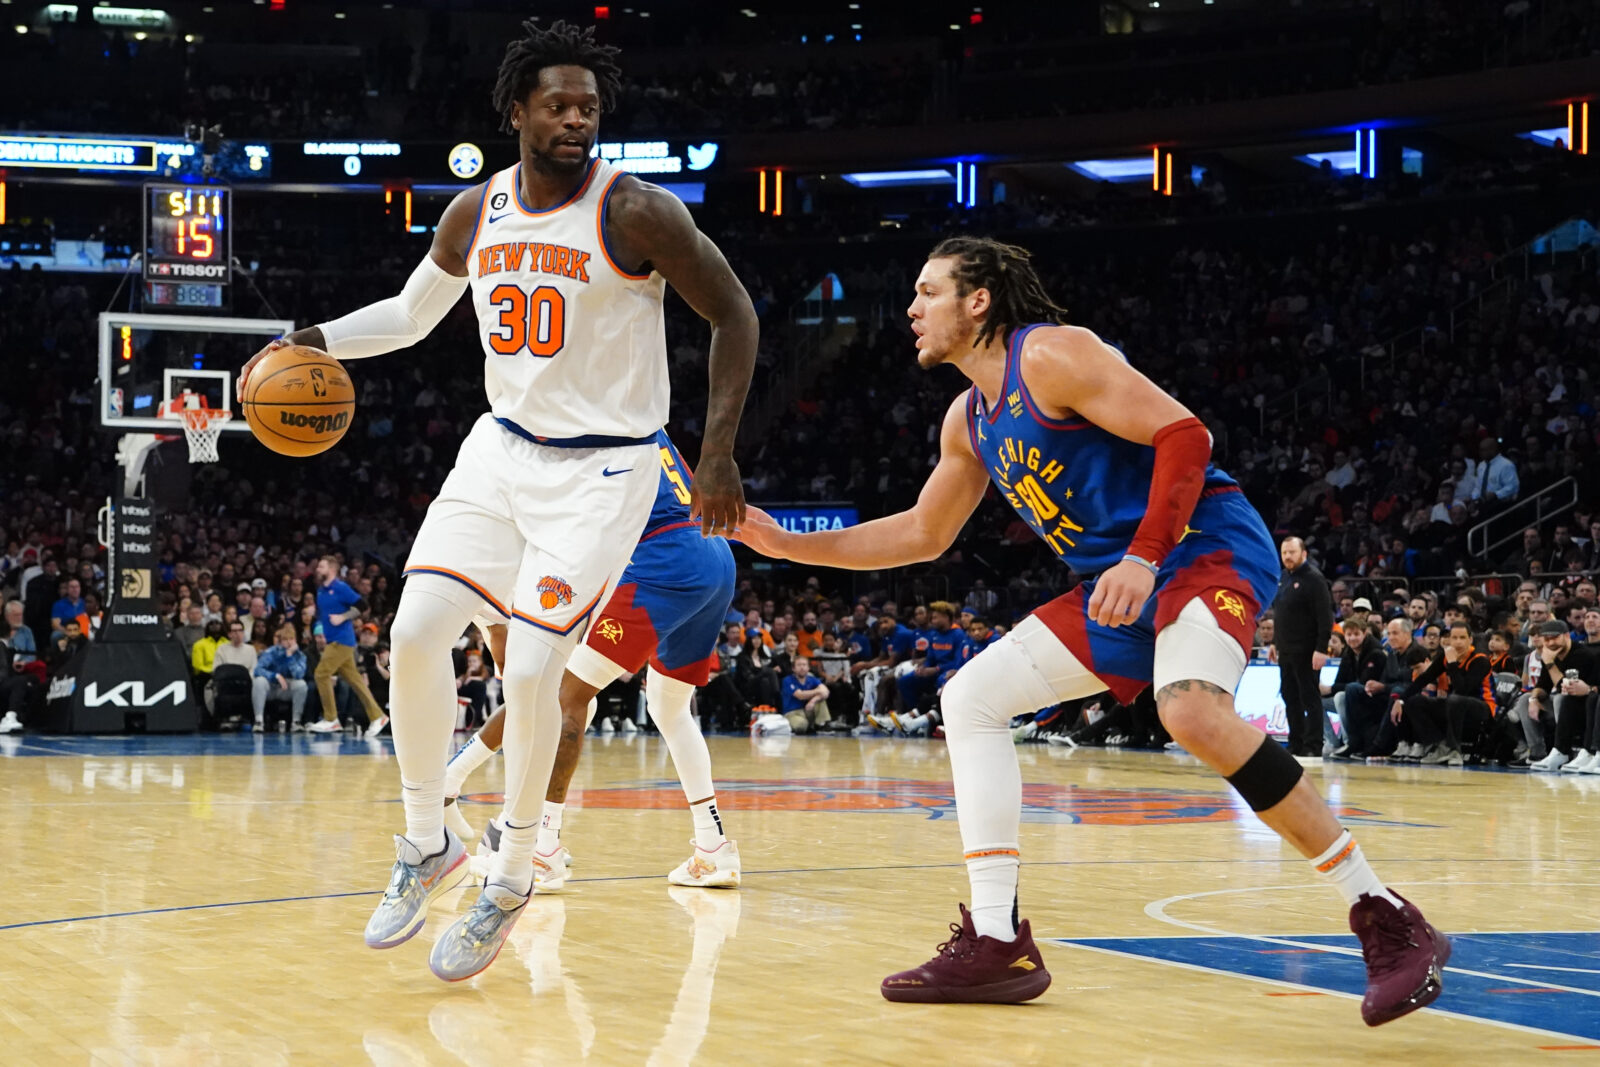 Knicks Bulletin: “I'd rather come off the bench. Maybe I can show